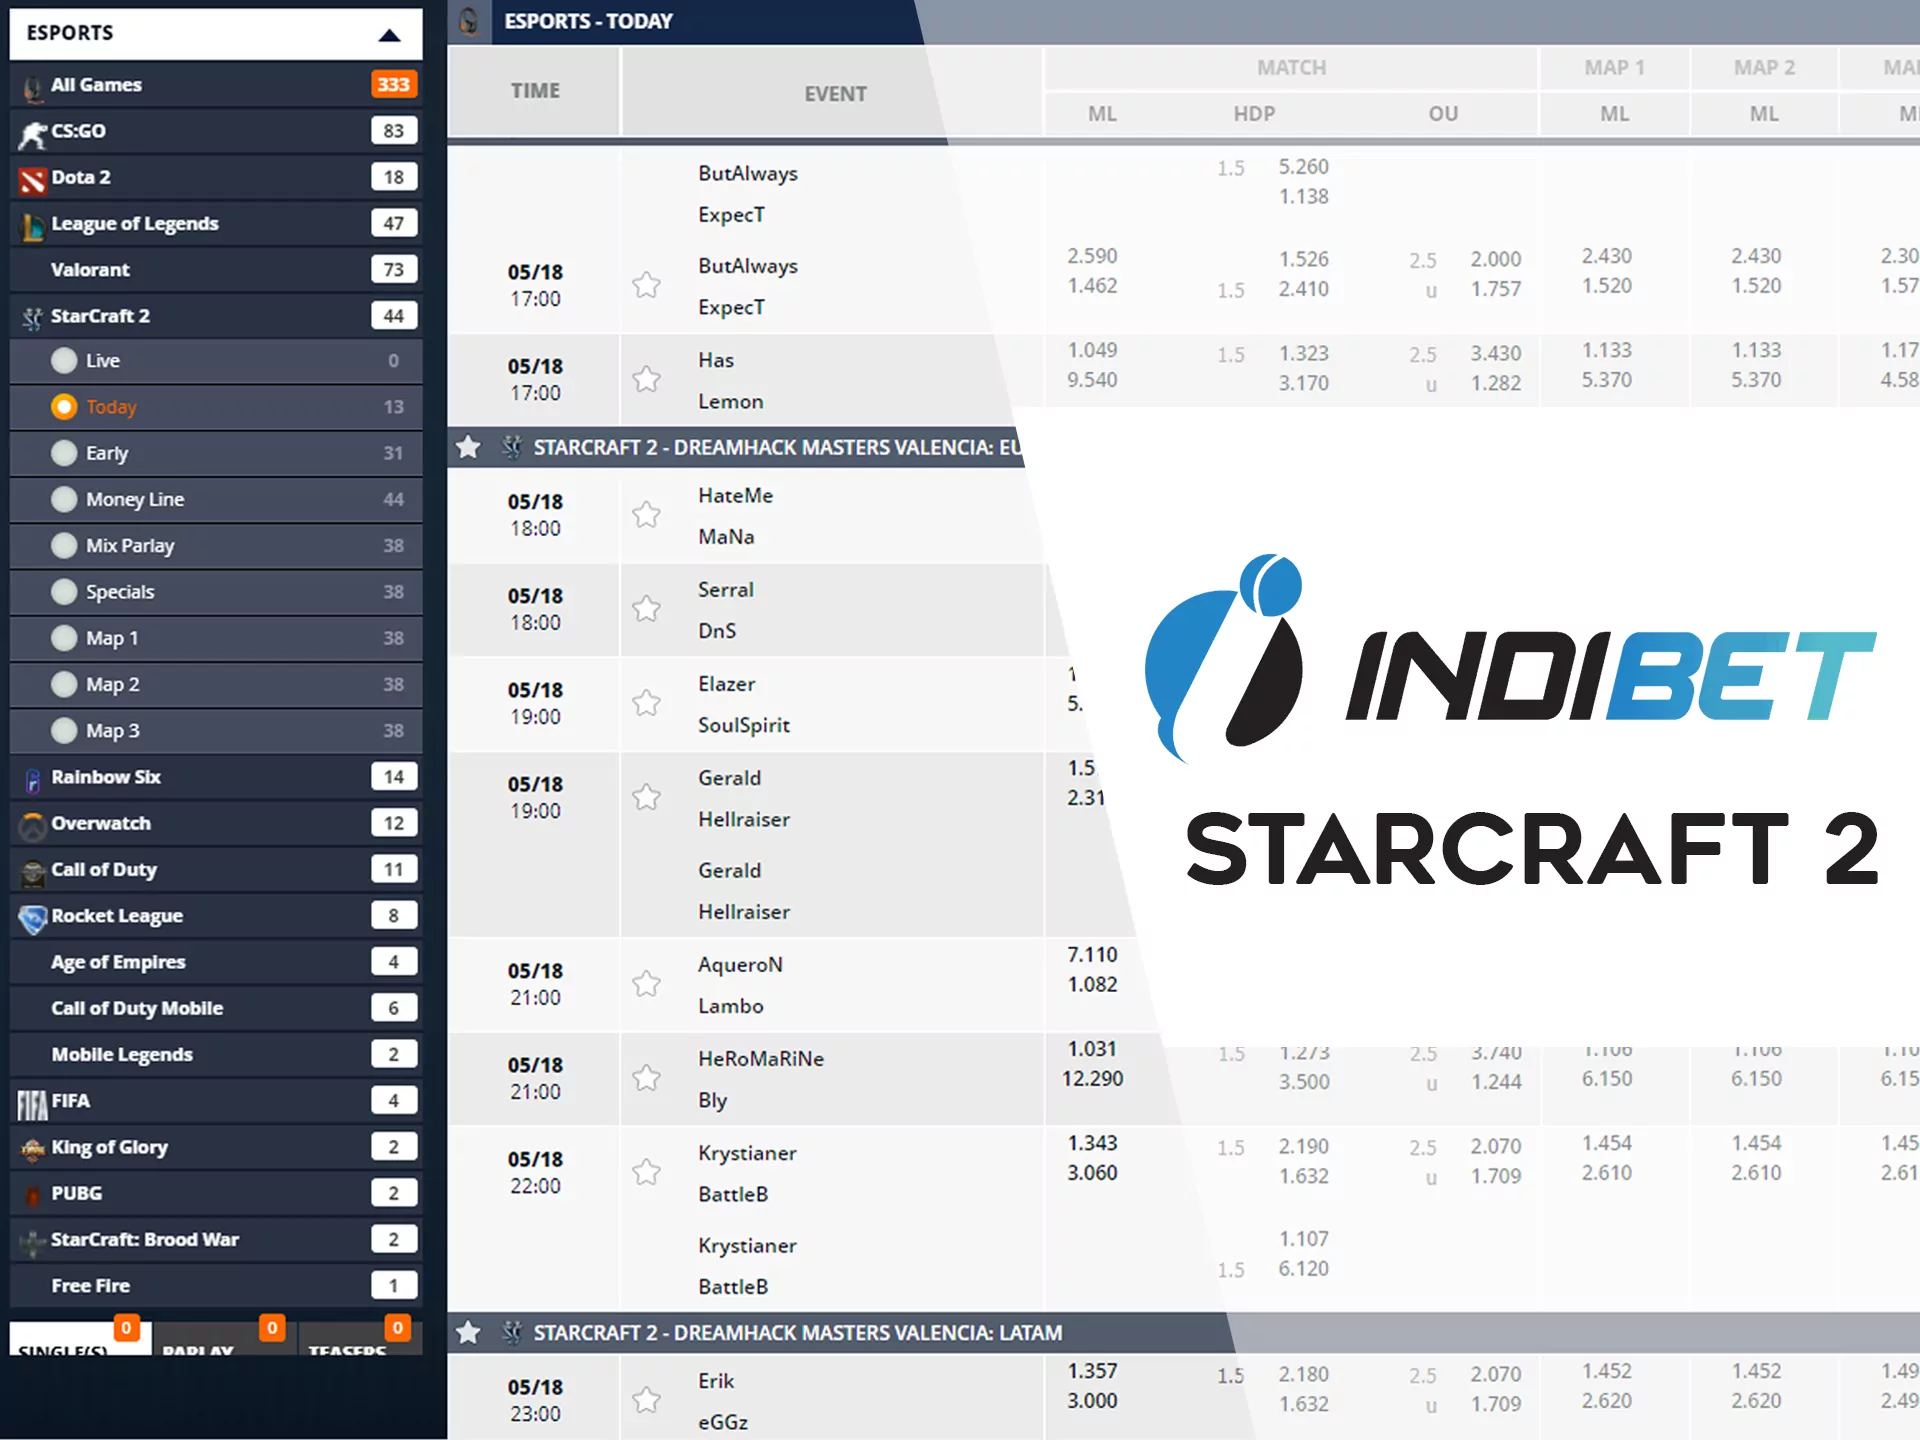 You can also place bets on Starcraft 2 at Indibet.